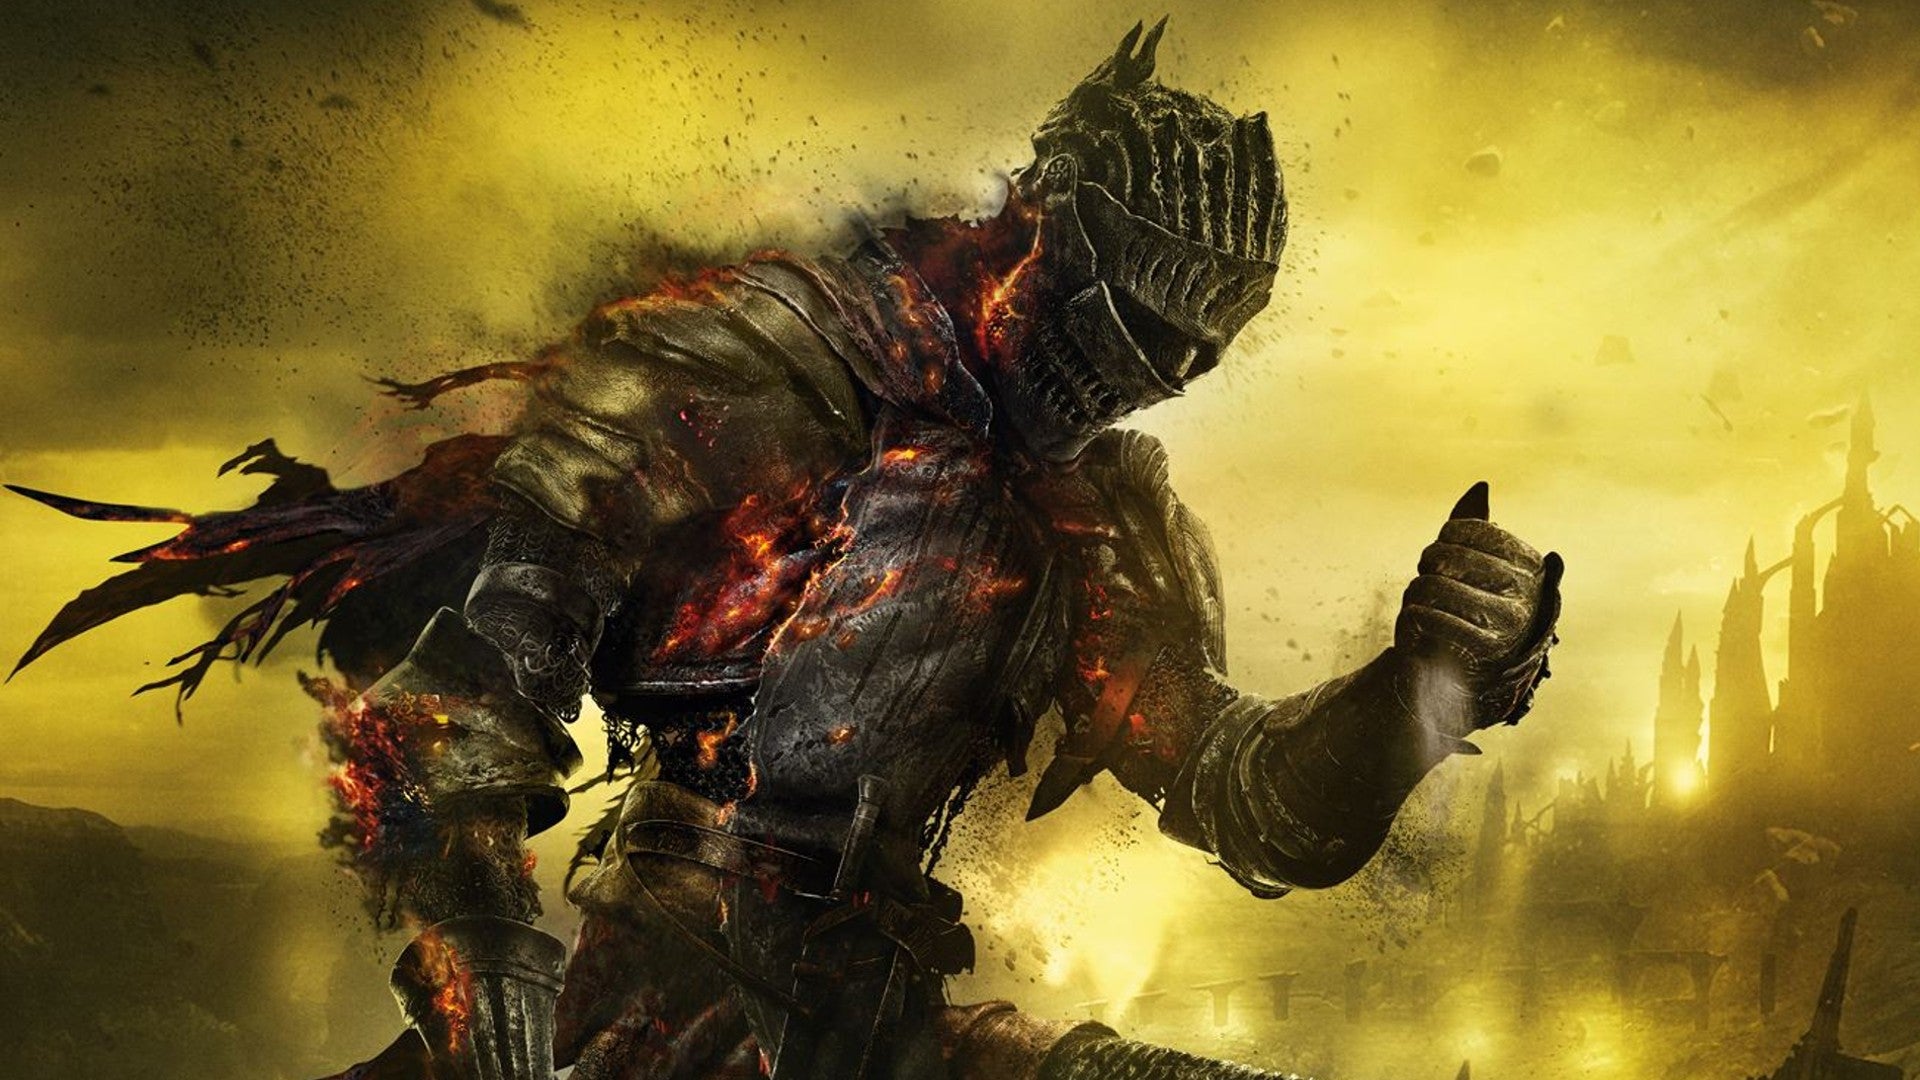 Dark Souls 3 is a 2016 action RPG from FromSoftware, developers of Elden Ring. Its servers are down again.